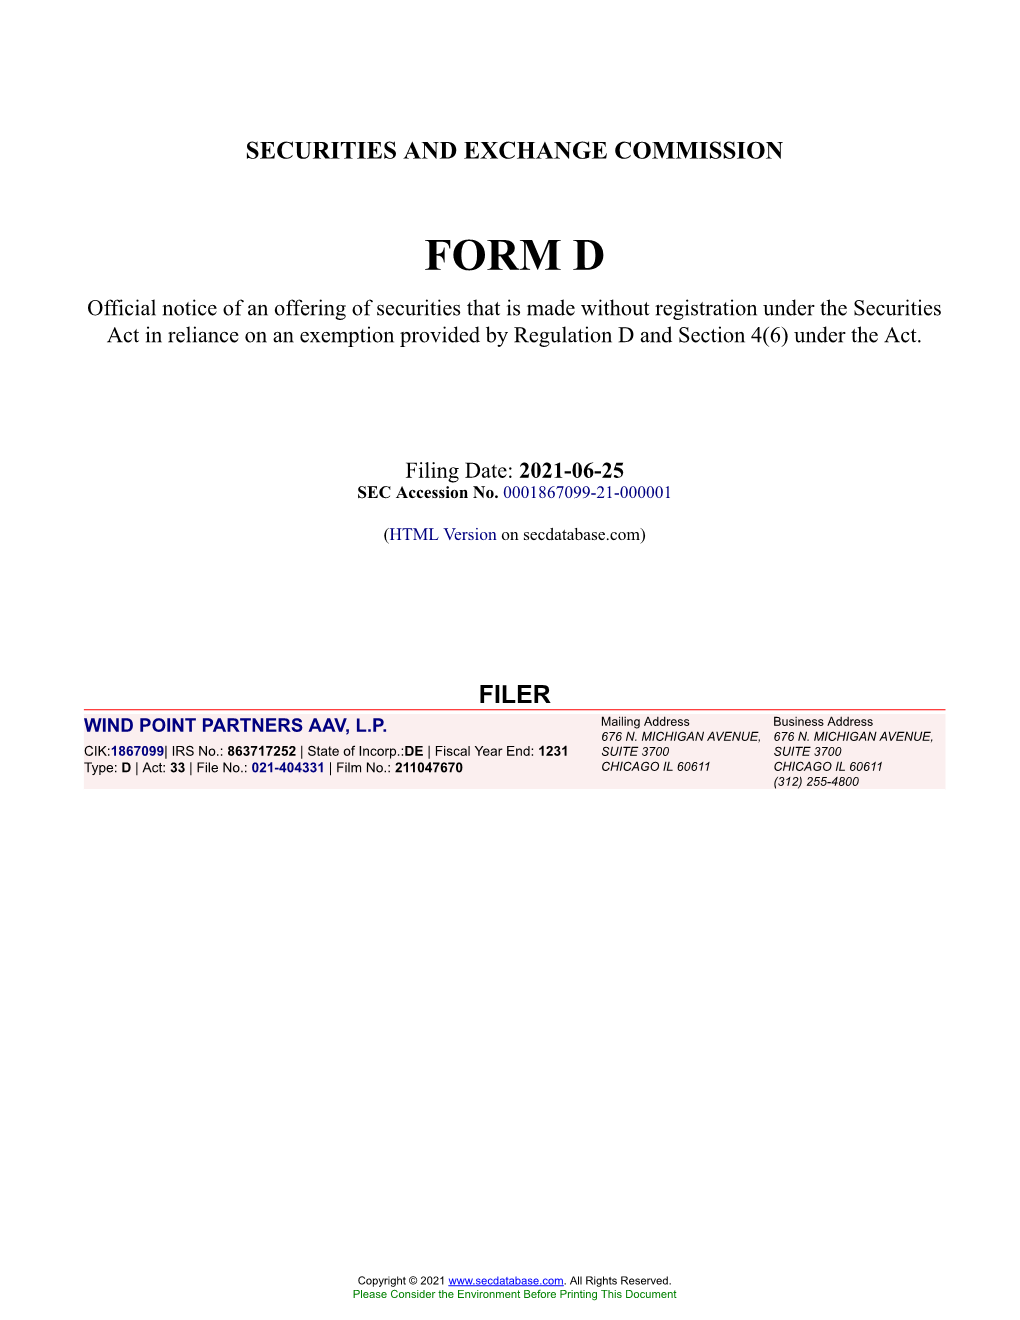 WIND POINT PARTNERS AAV, L.P. Form D Filed 2021-06-25